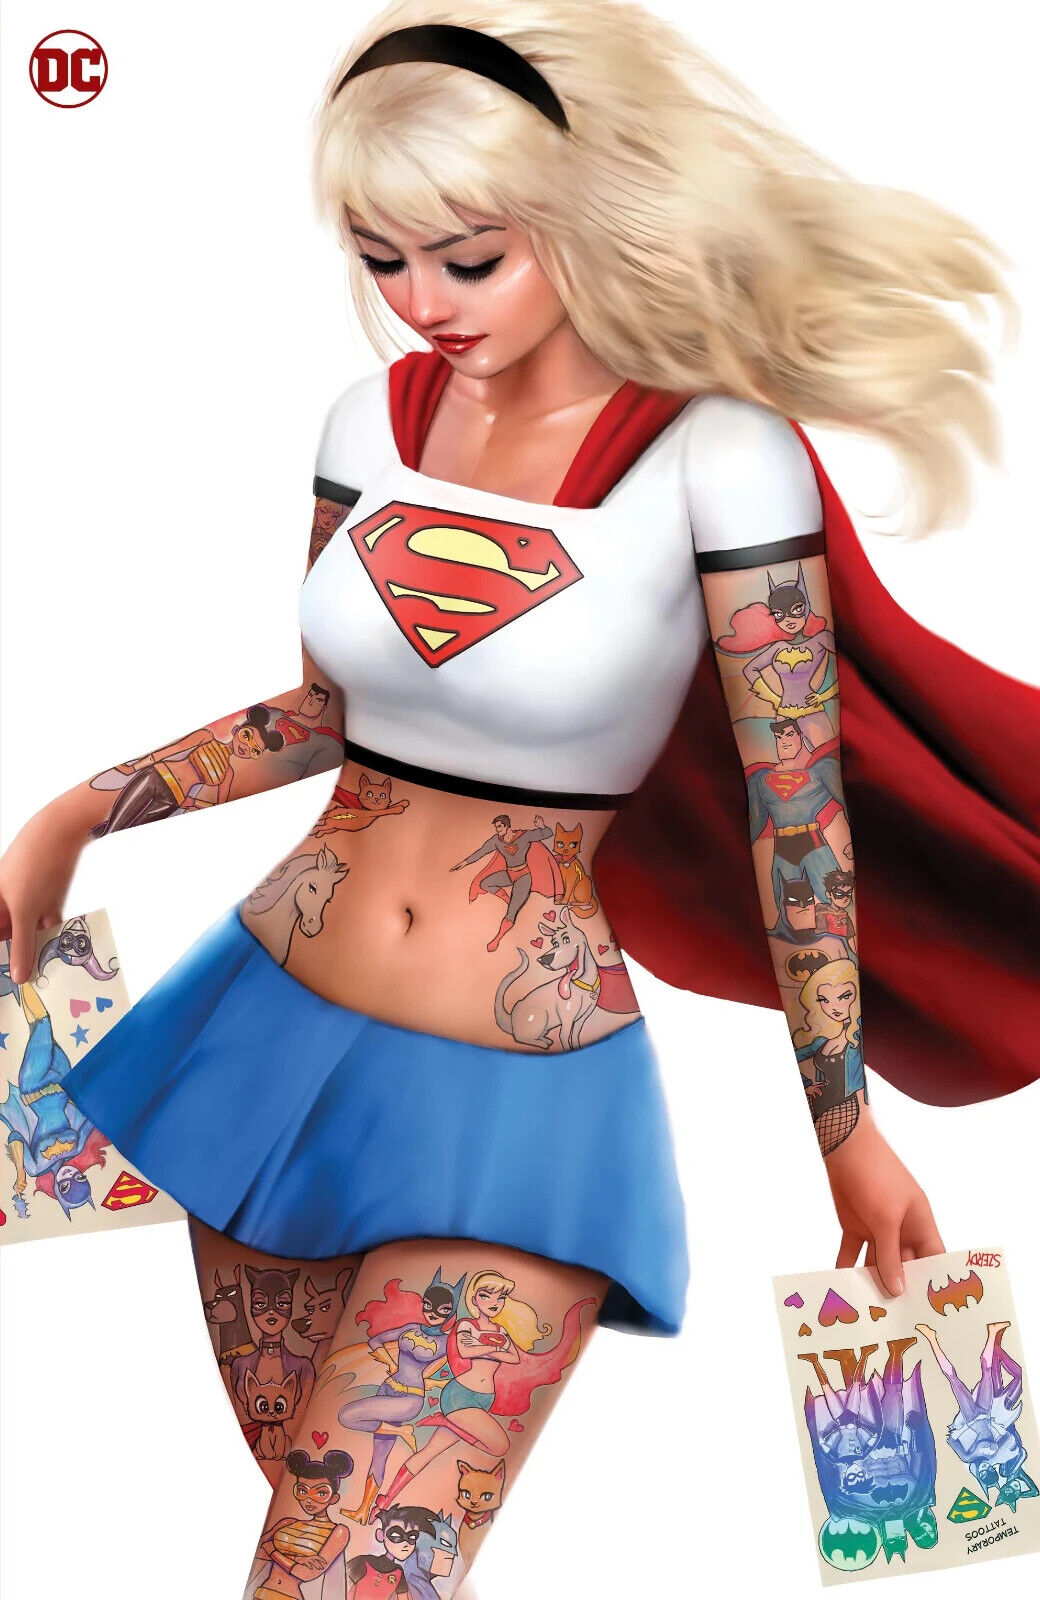 ACTION COMICS PRESENTS: DOOMSDAY SPECIAL #1 (SZERDY SUPERGIRL TATTOO EXCLUSIVE)